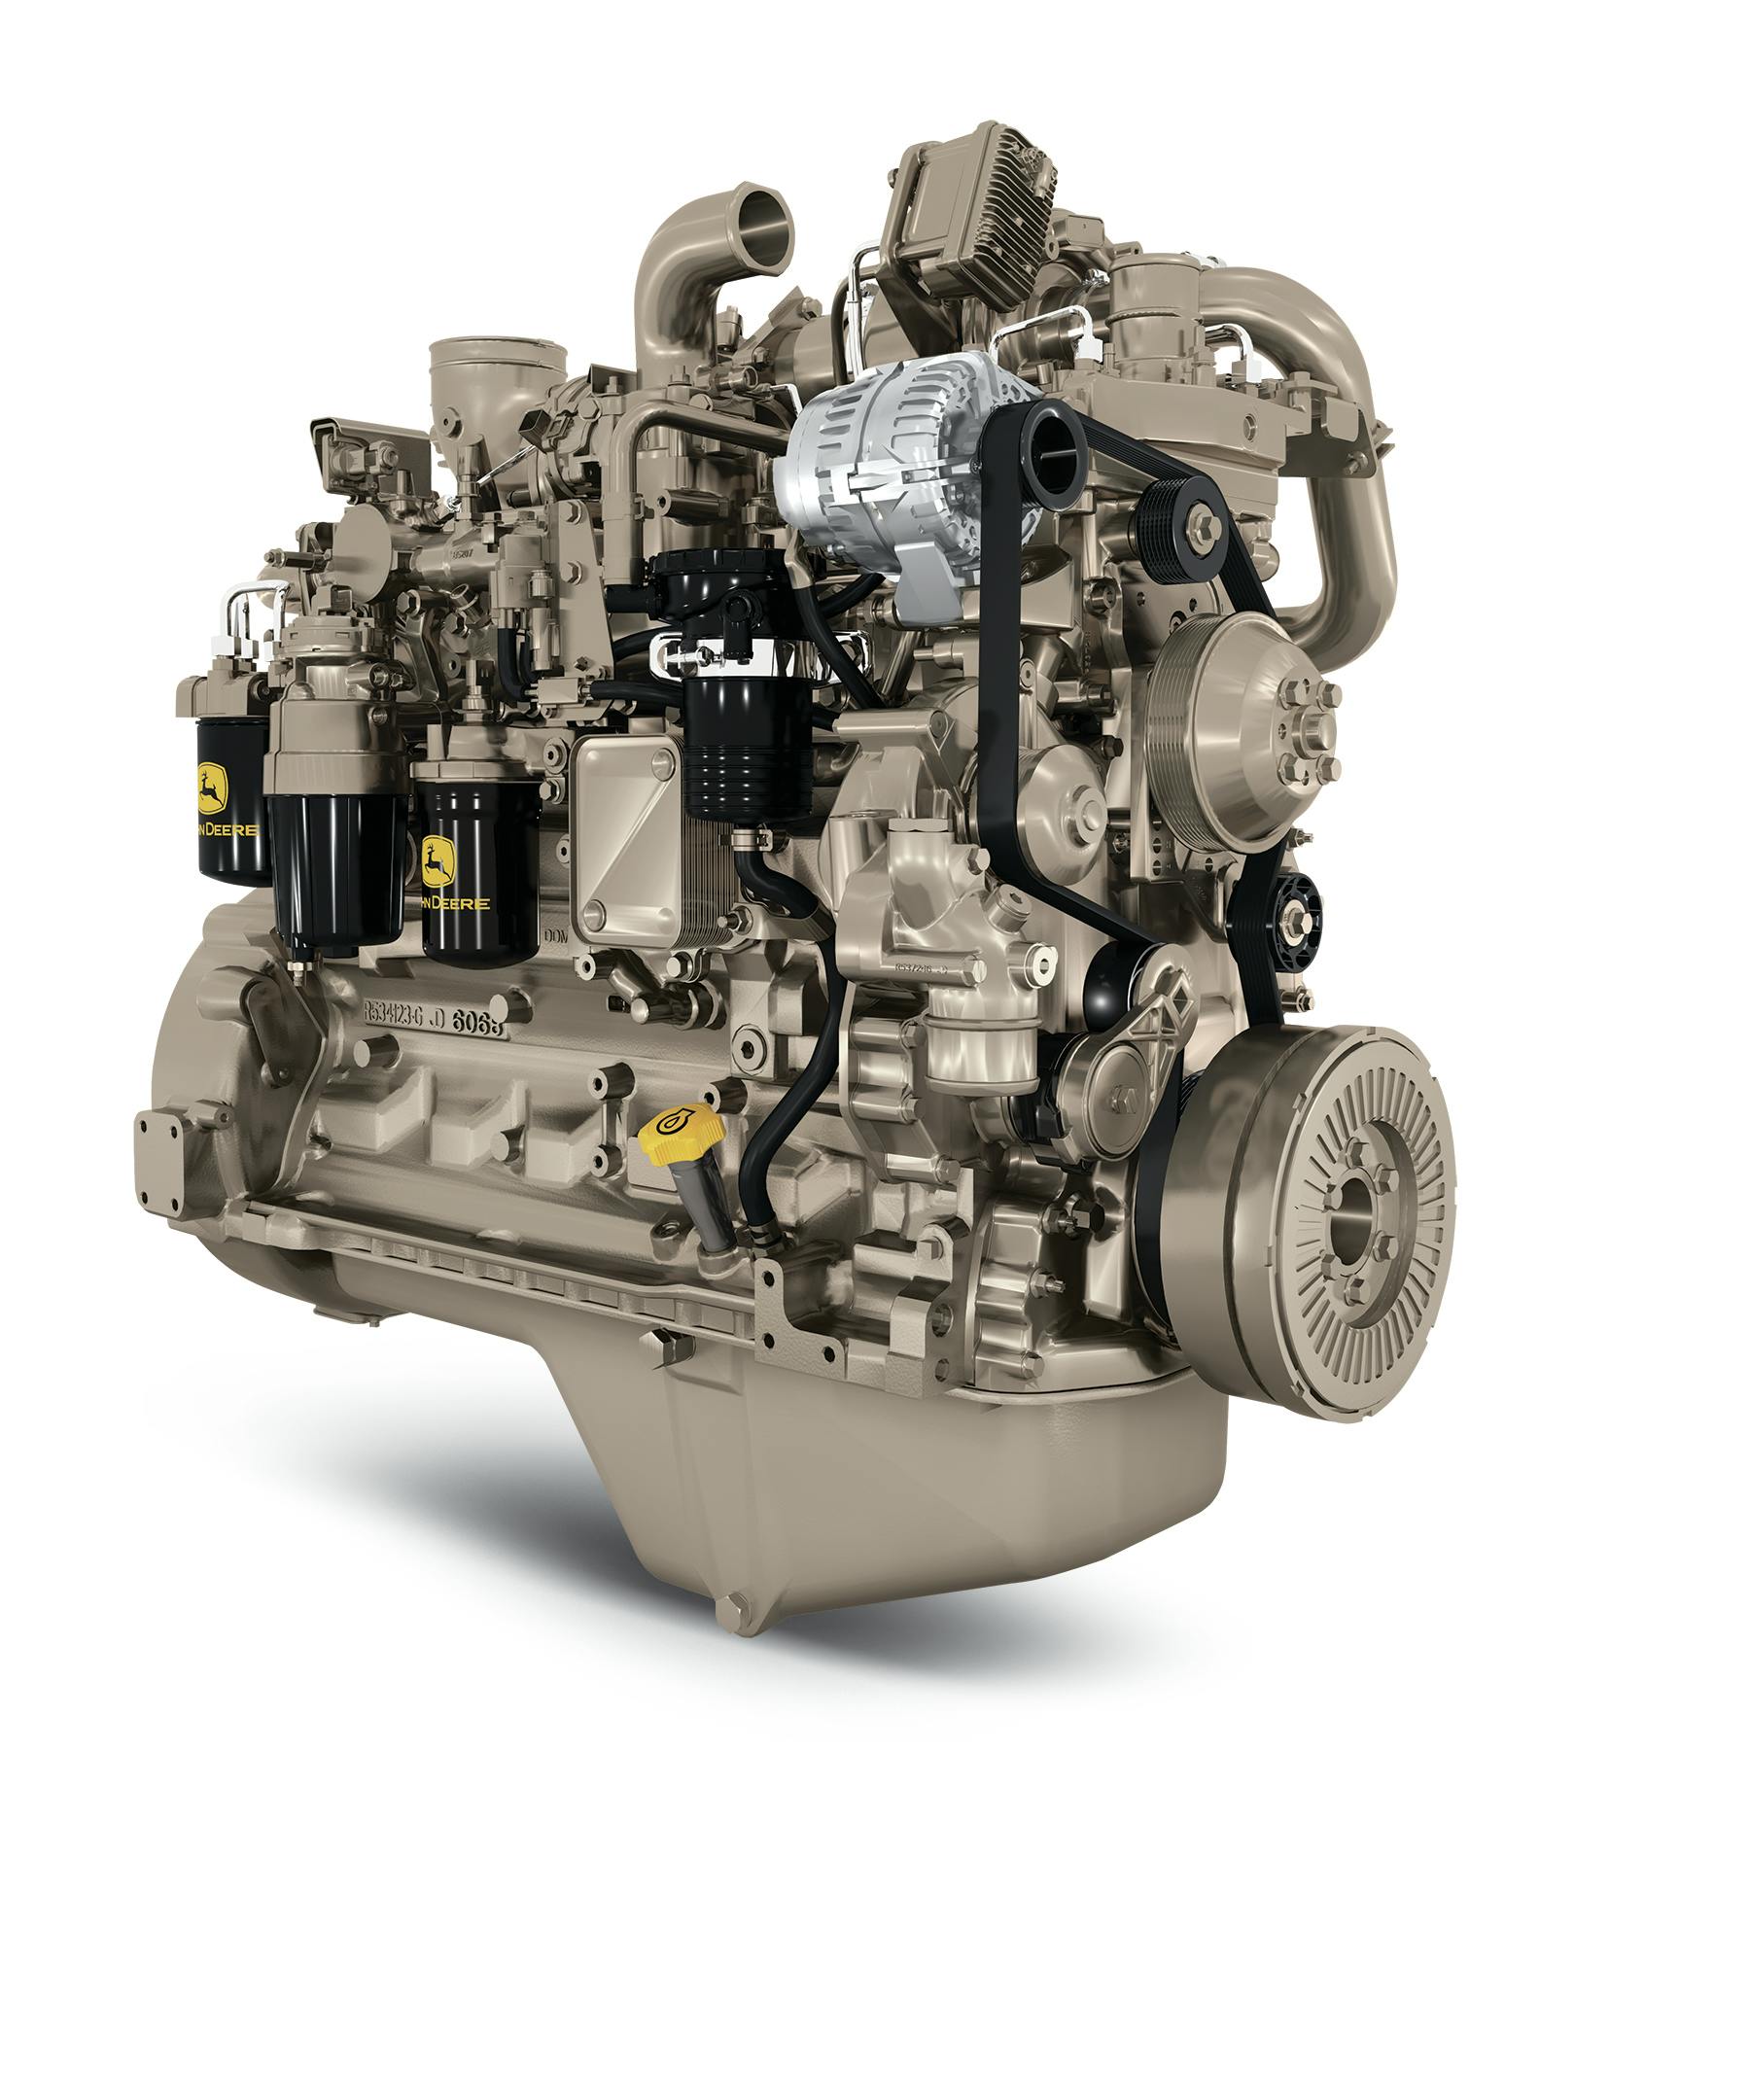 John Deere Power Systems Receives EPA Final Tier 4, EU Stage IV, CARB Certifications | Construction News